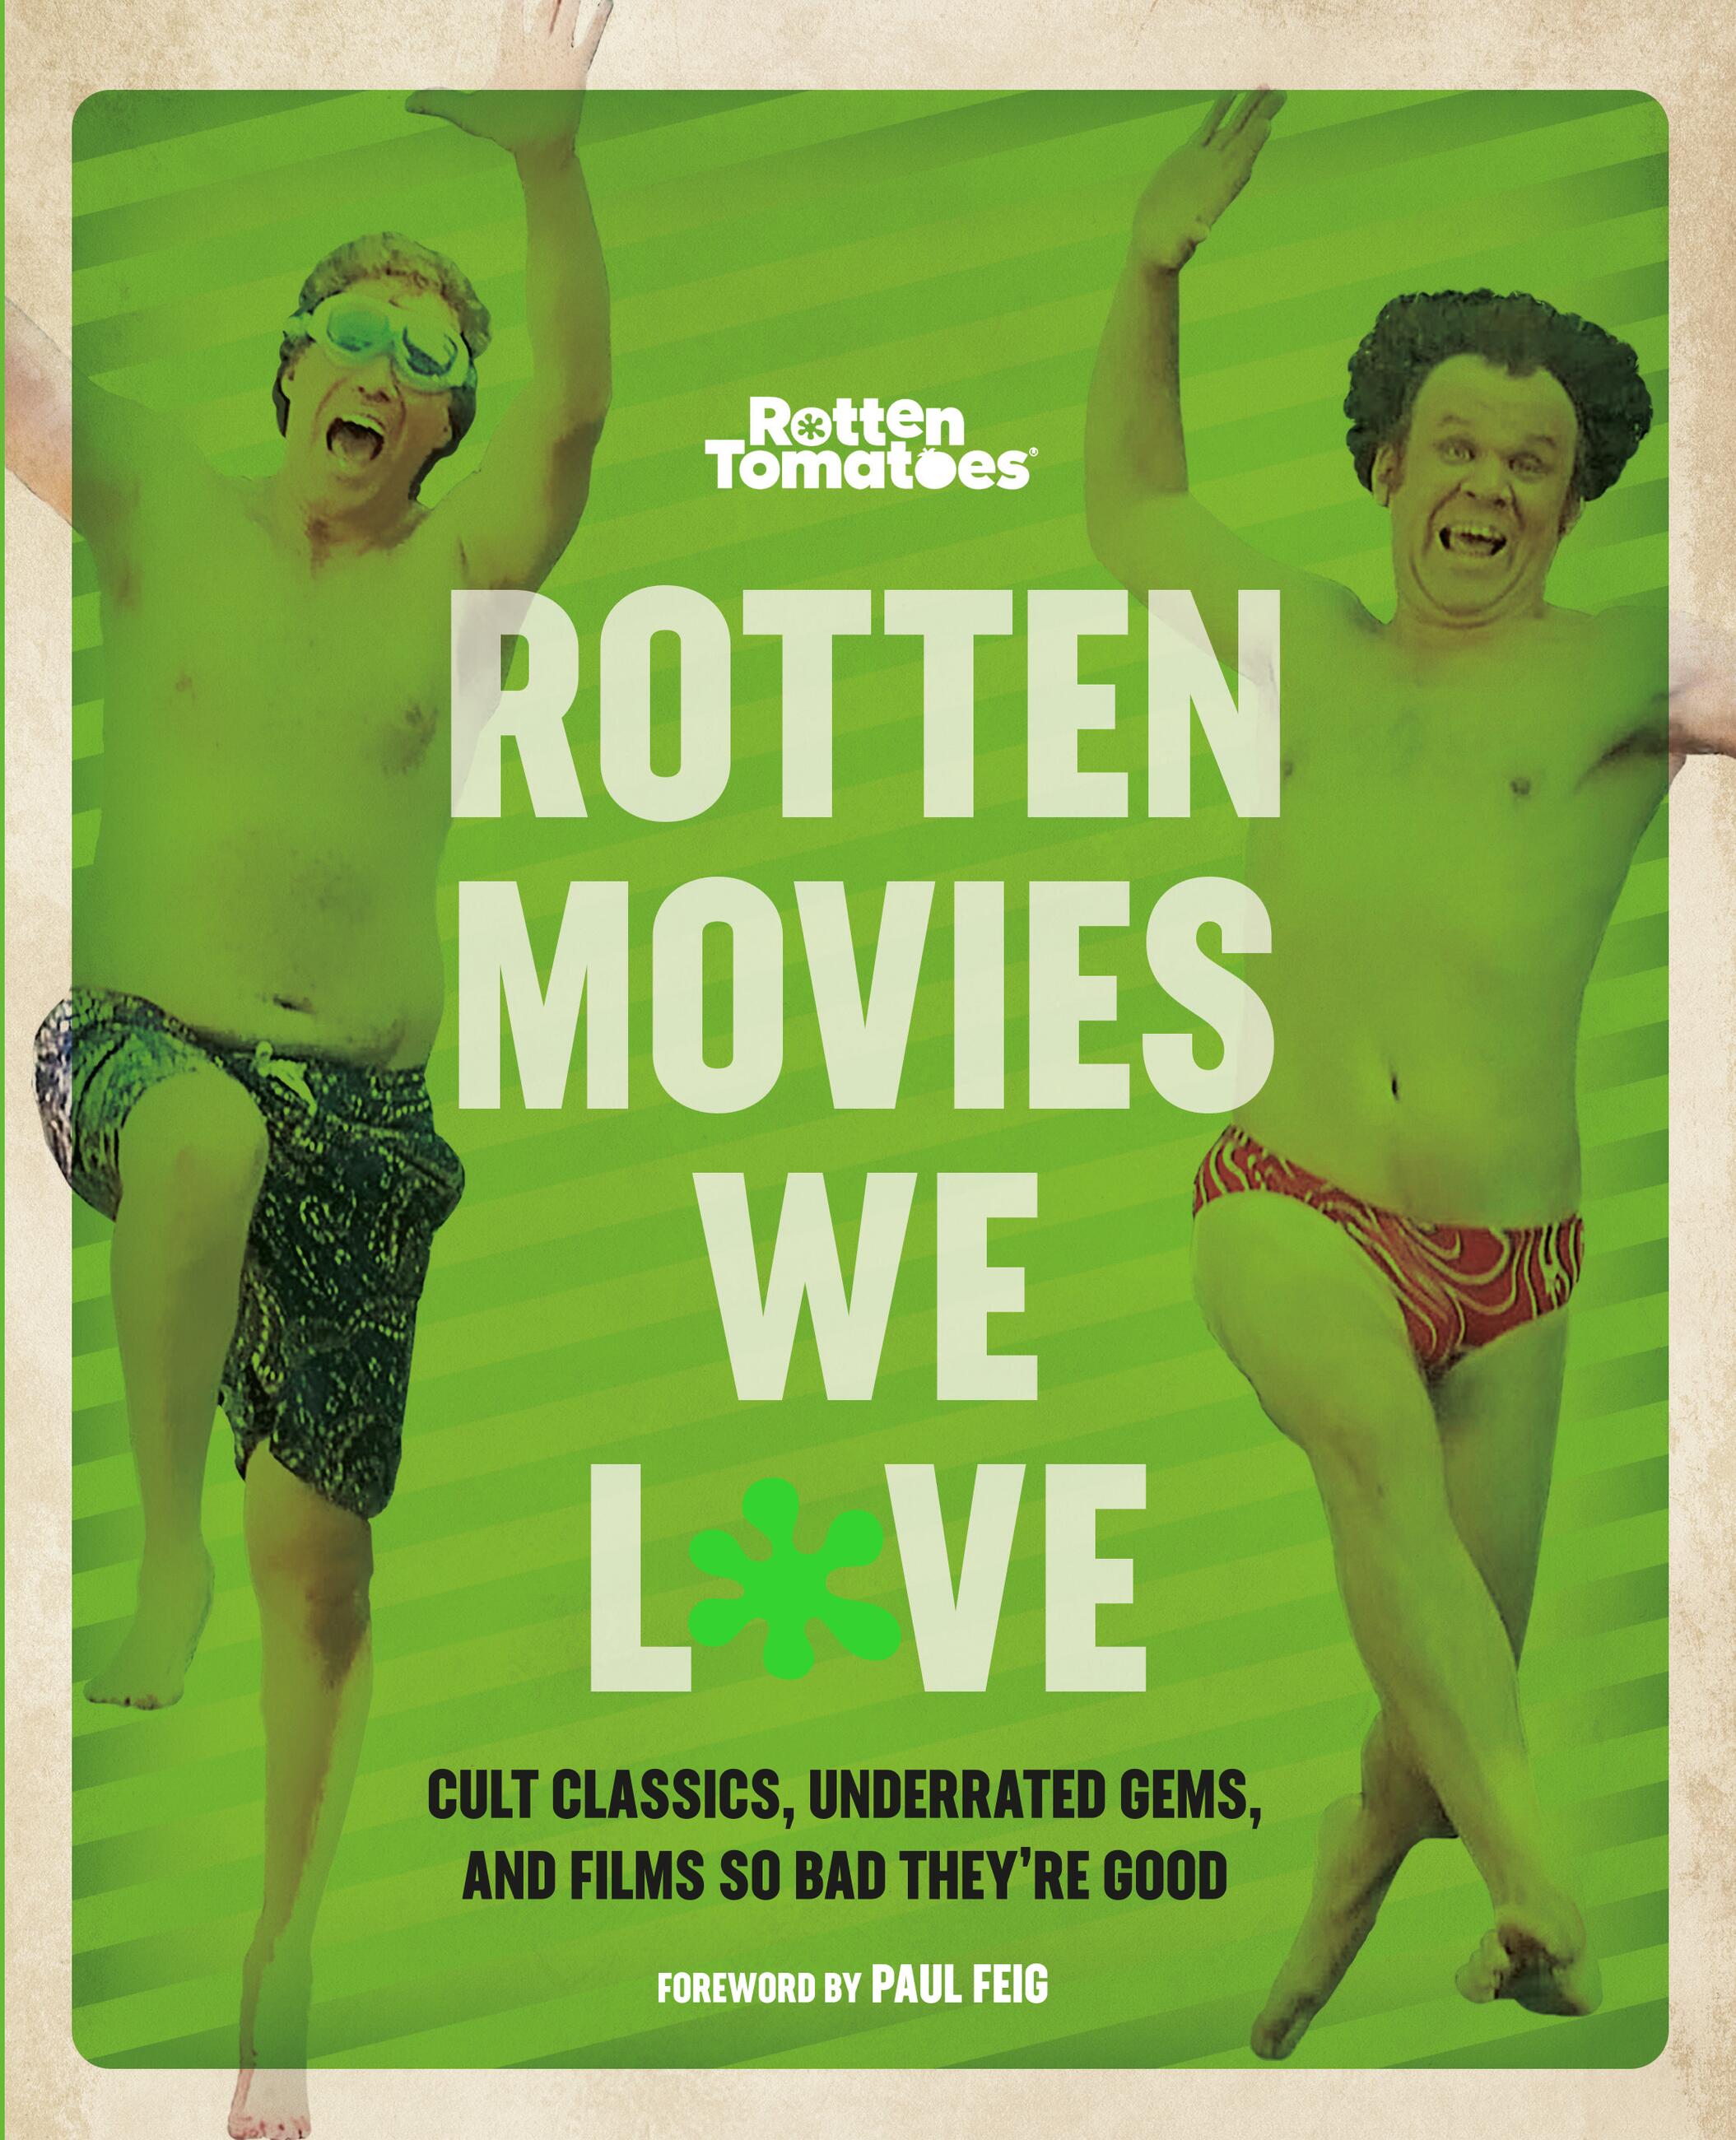 Rotten Tomatoes Is Wrong (A Podcast from Rotten Tomatoes): We're Wrong  About Uncharted (Movie Review) on Apple Podcasts